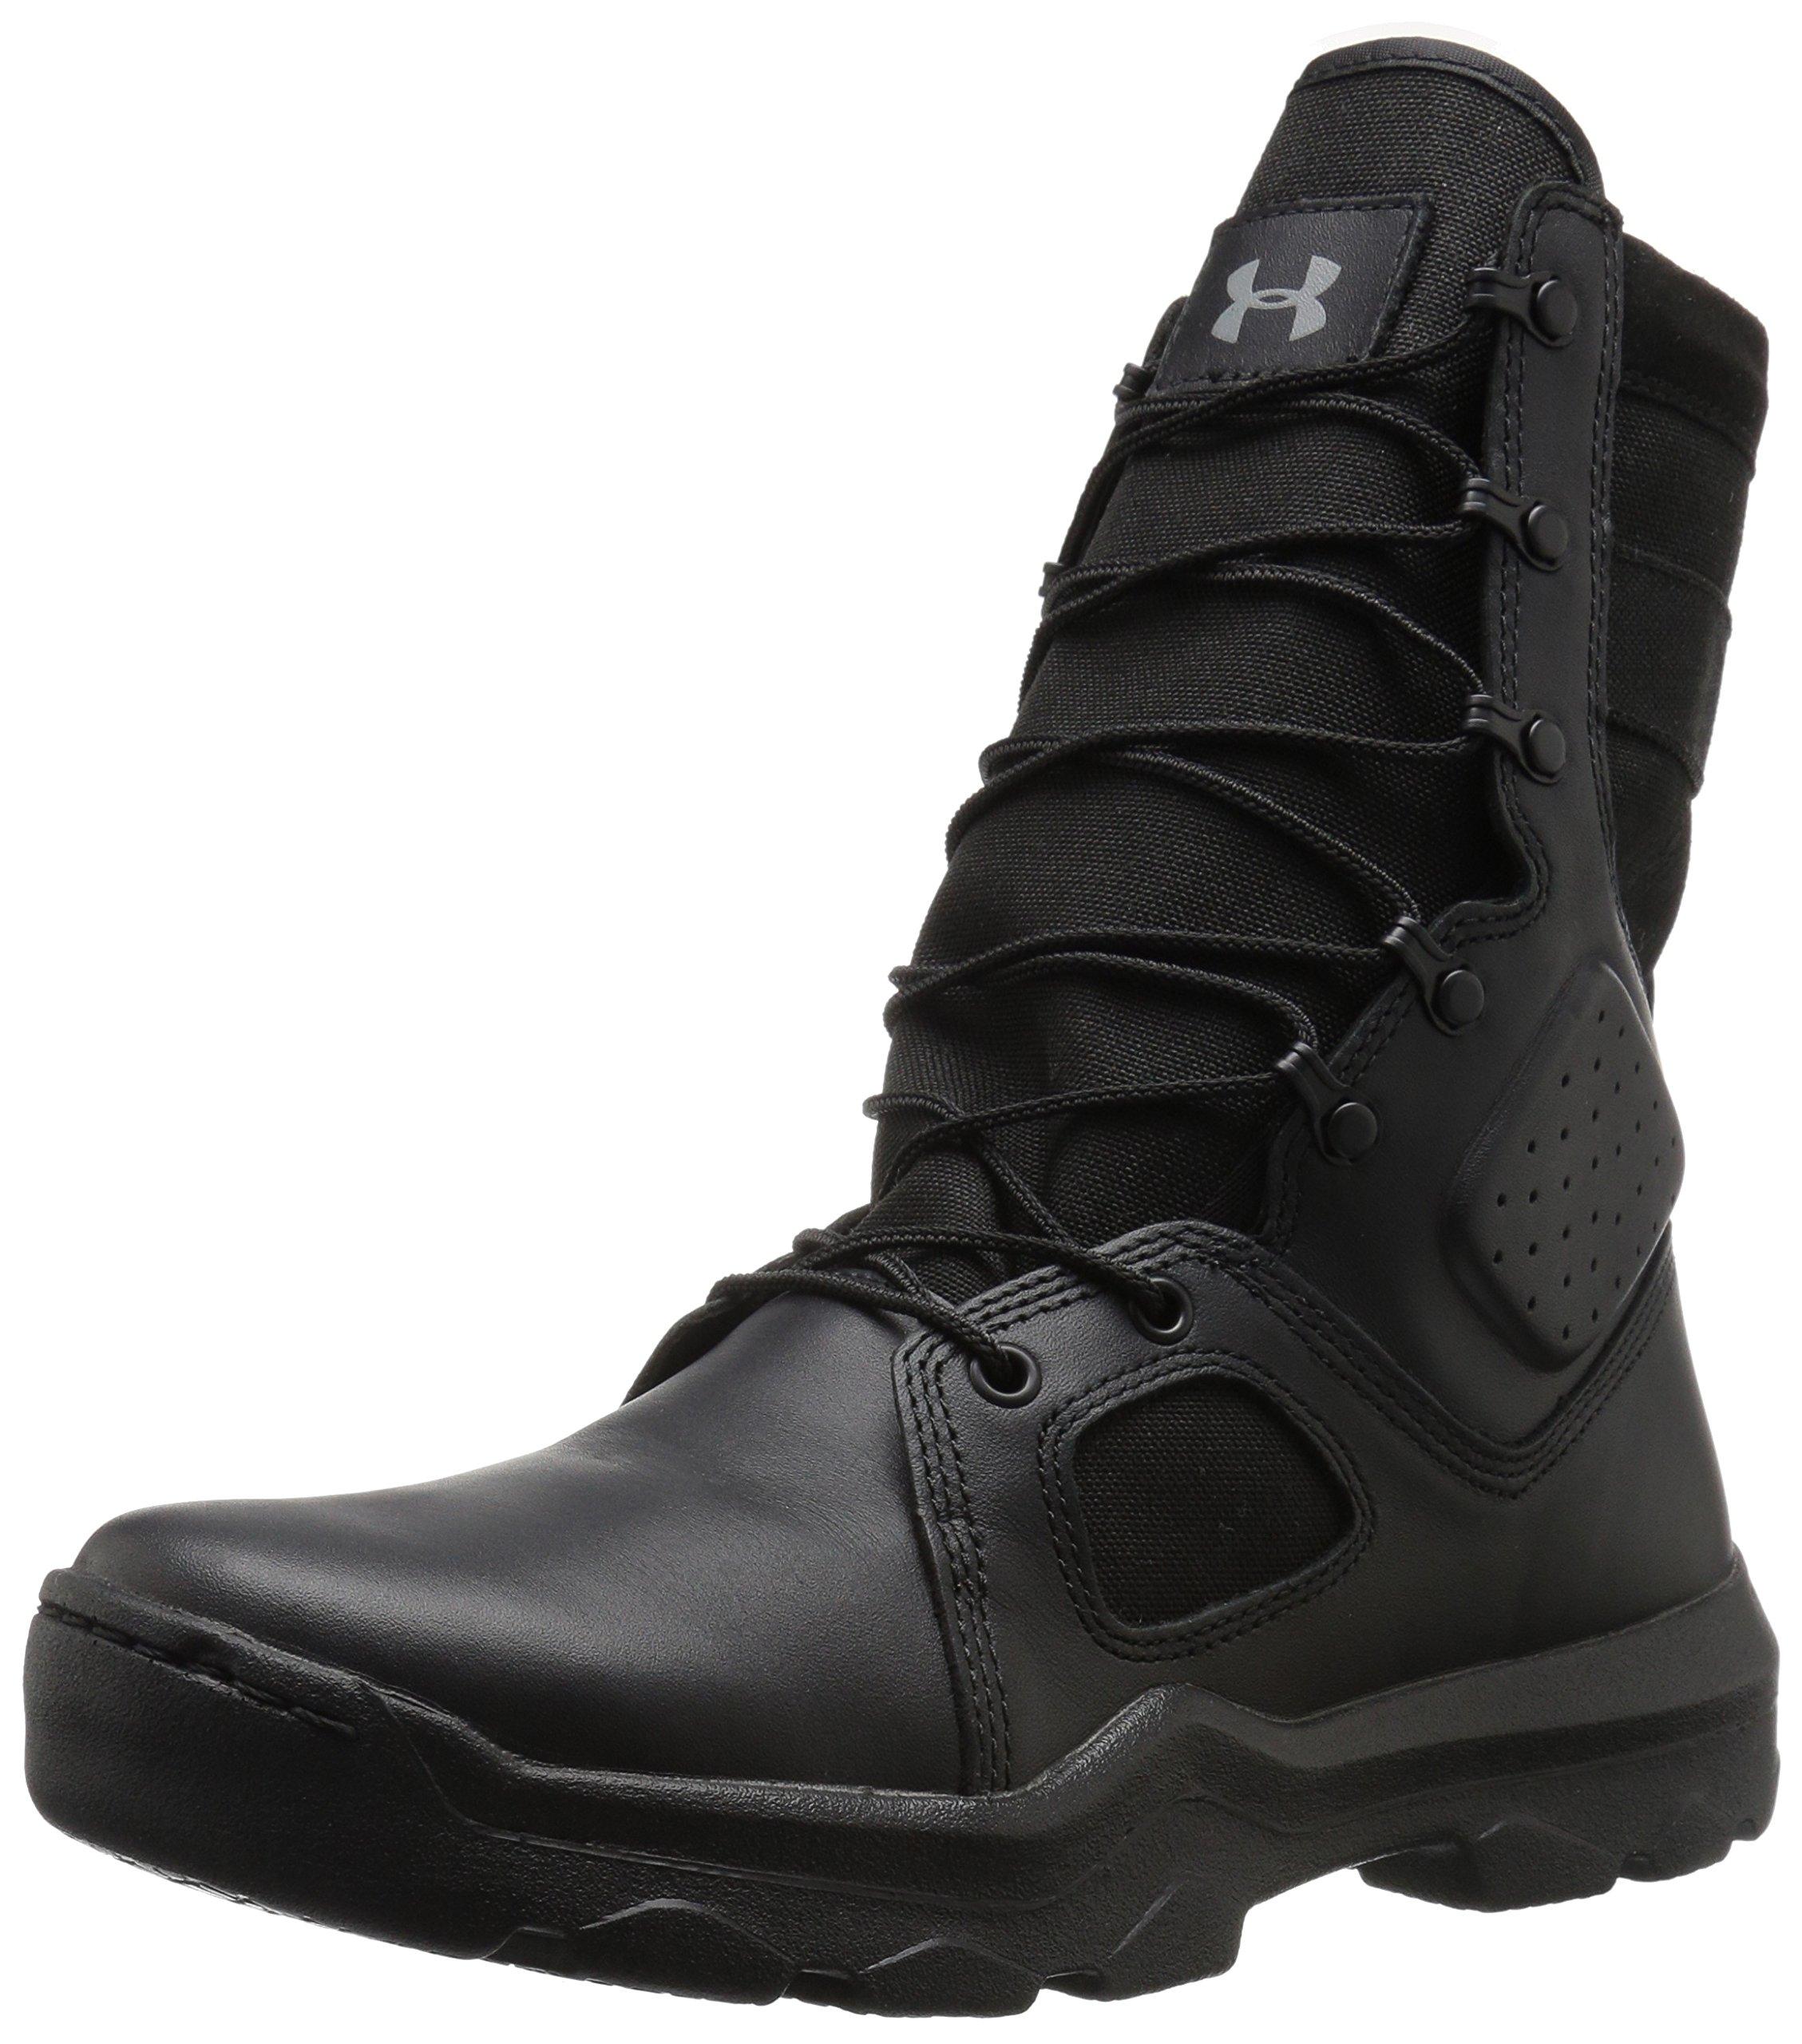 Under Armour Suede Fnp Military And Tactical Boot in Black/Black (Black ...